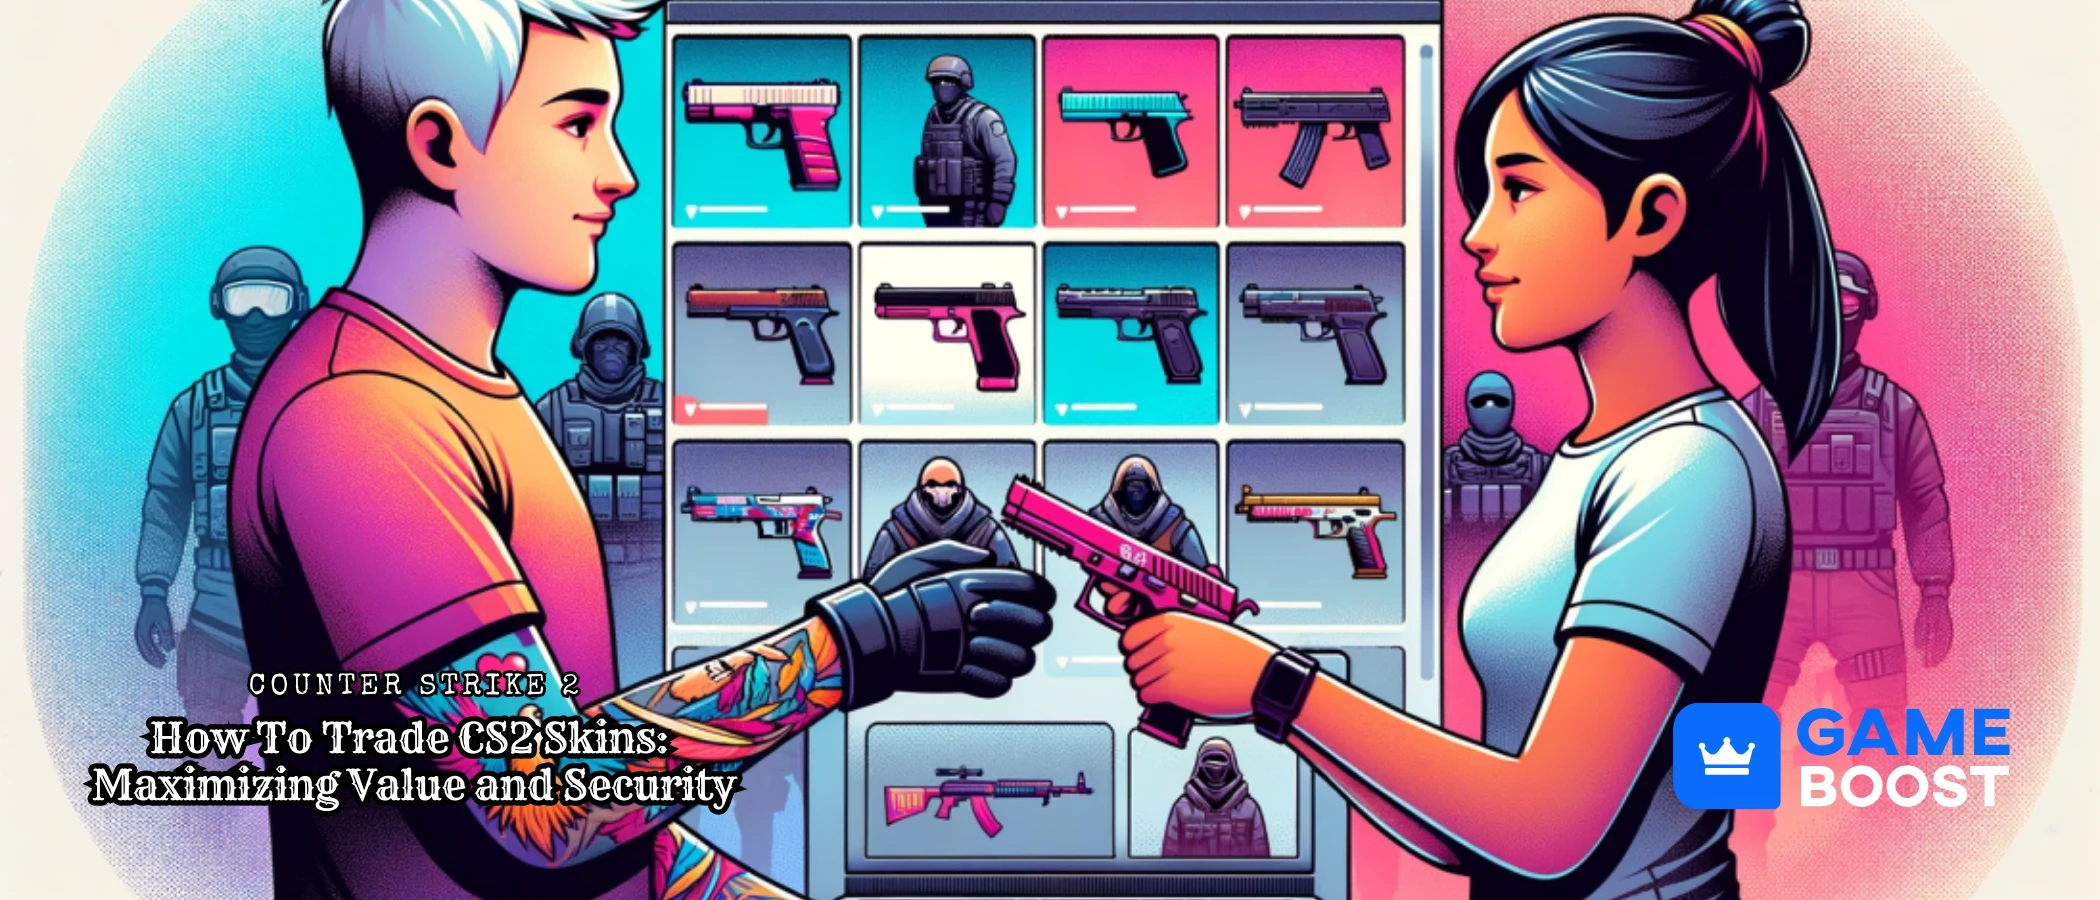 art representing trading skins in counter strike 2. blog title and gameboost logo